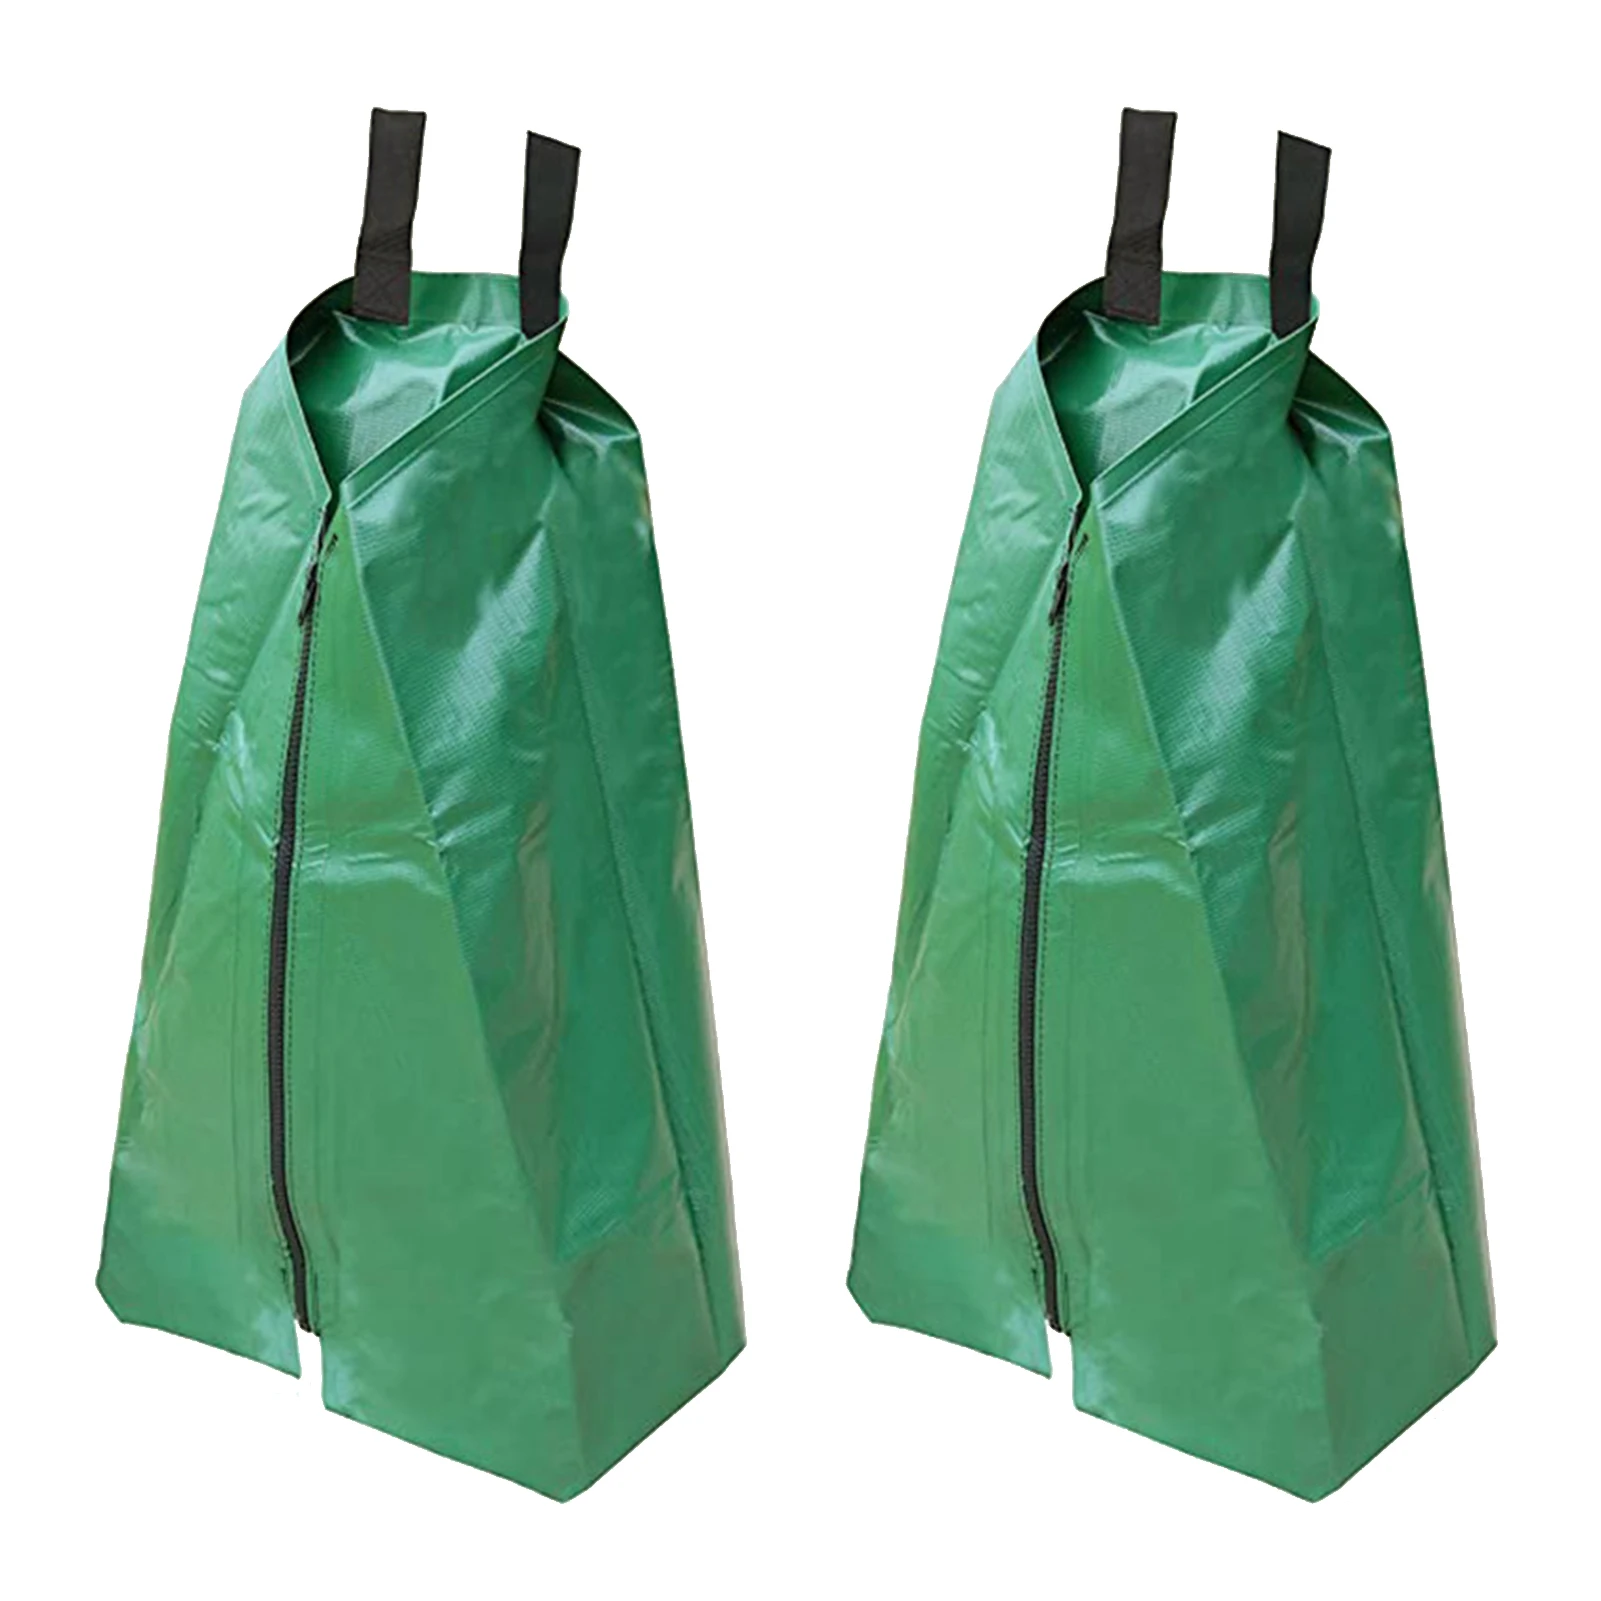 2pcs Reusable Drip PVC Slow Release Targeted 20 Gallon Gardening Tool Shrub Large Green Tree Watering Bag Continuous UV Stable